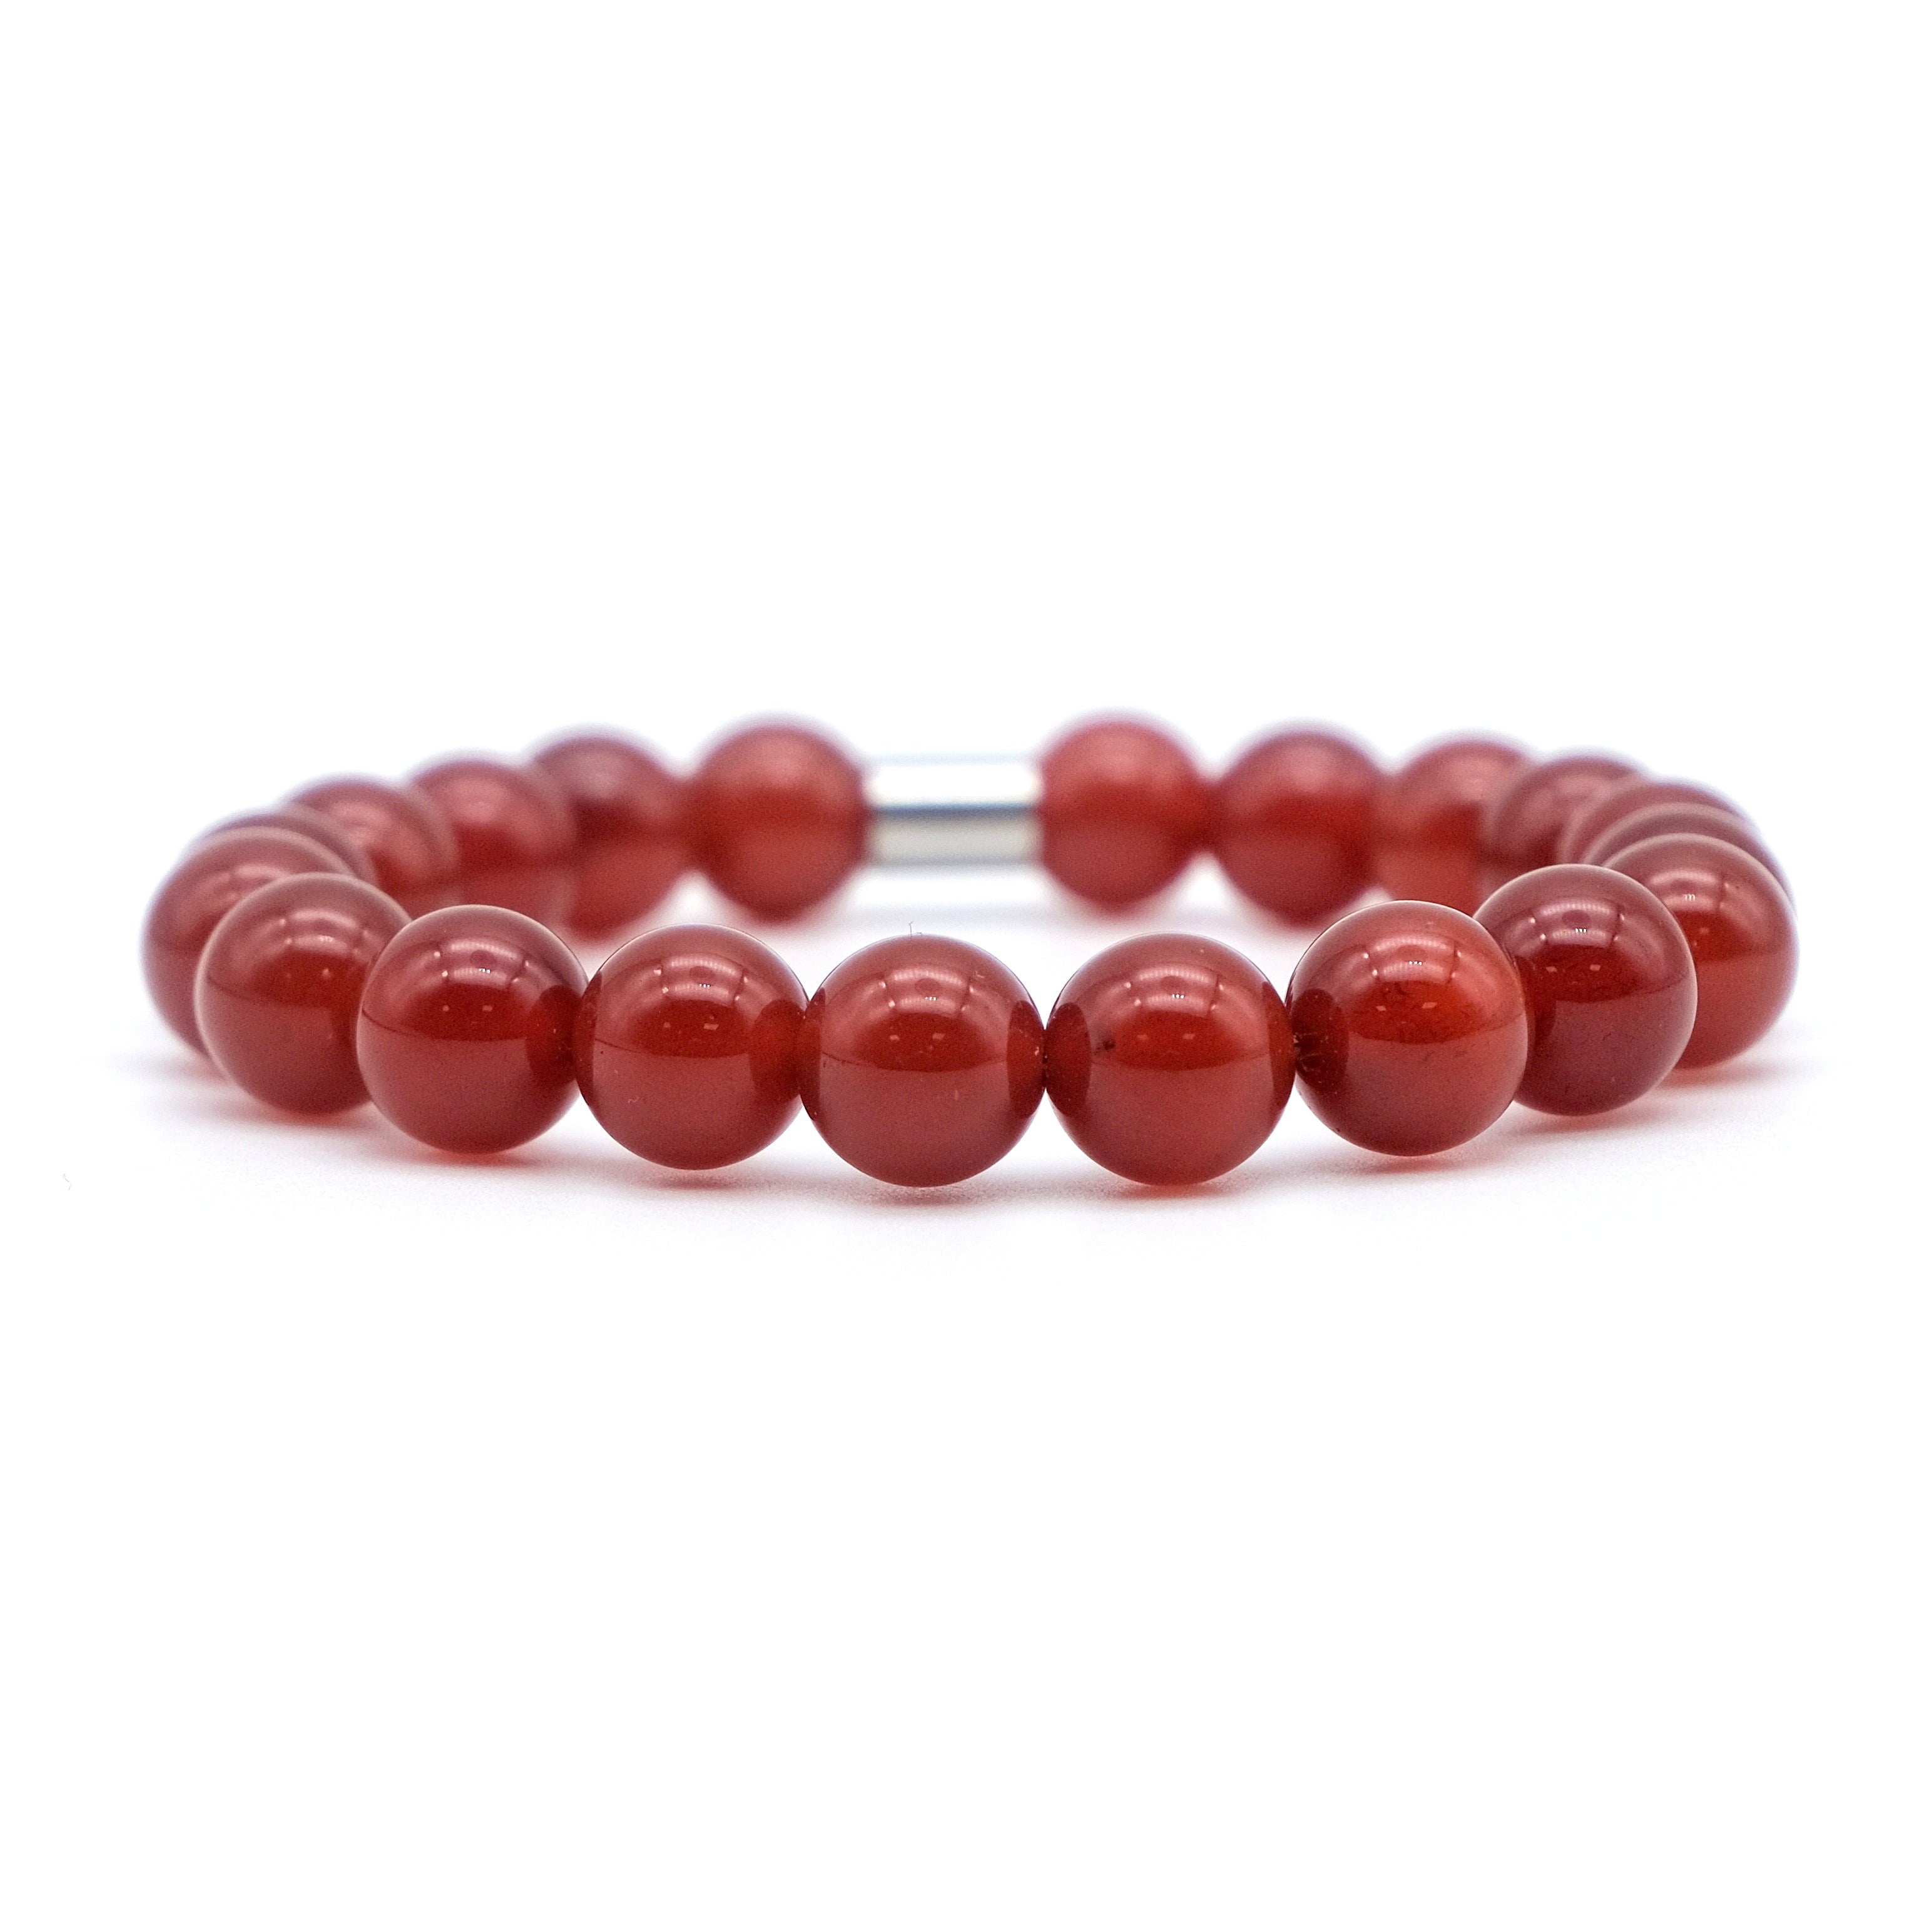 A carnelian gemstone bracelet in 10mm beads with stainless steel accessory